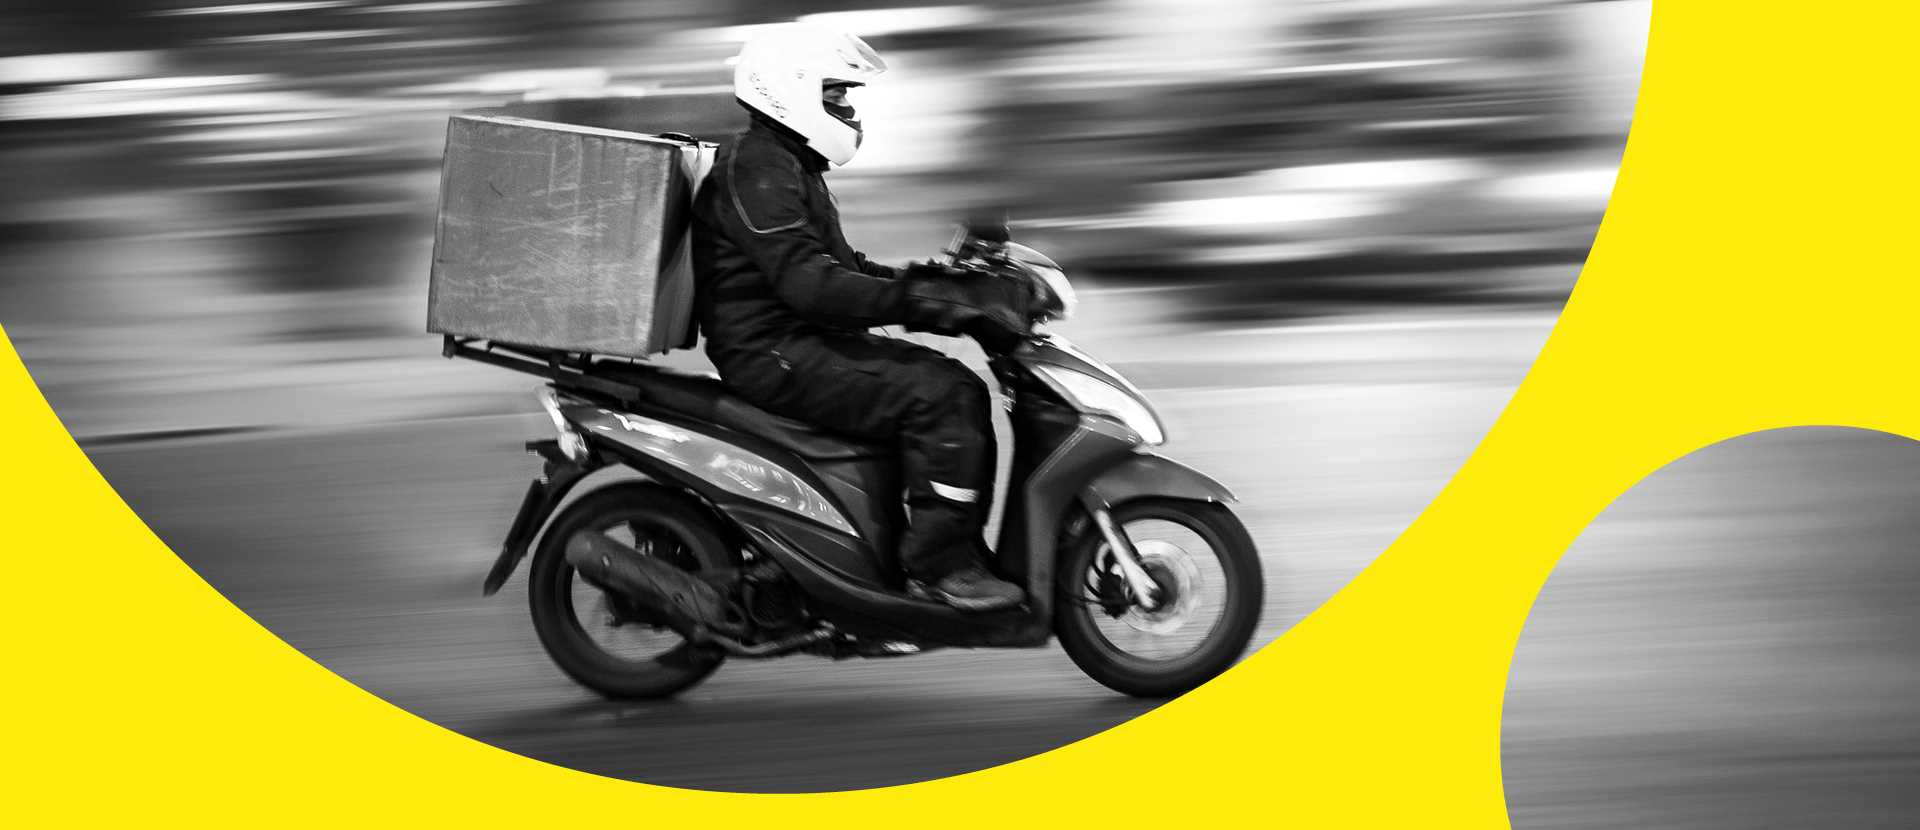 delivery yellow_1920x83029